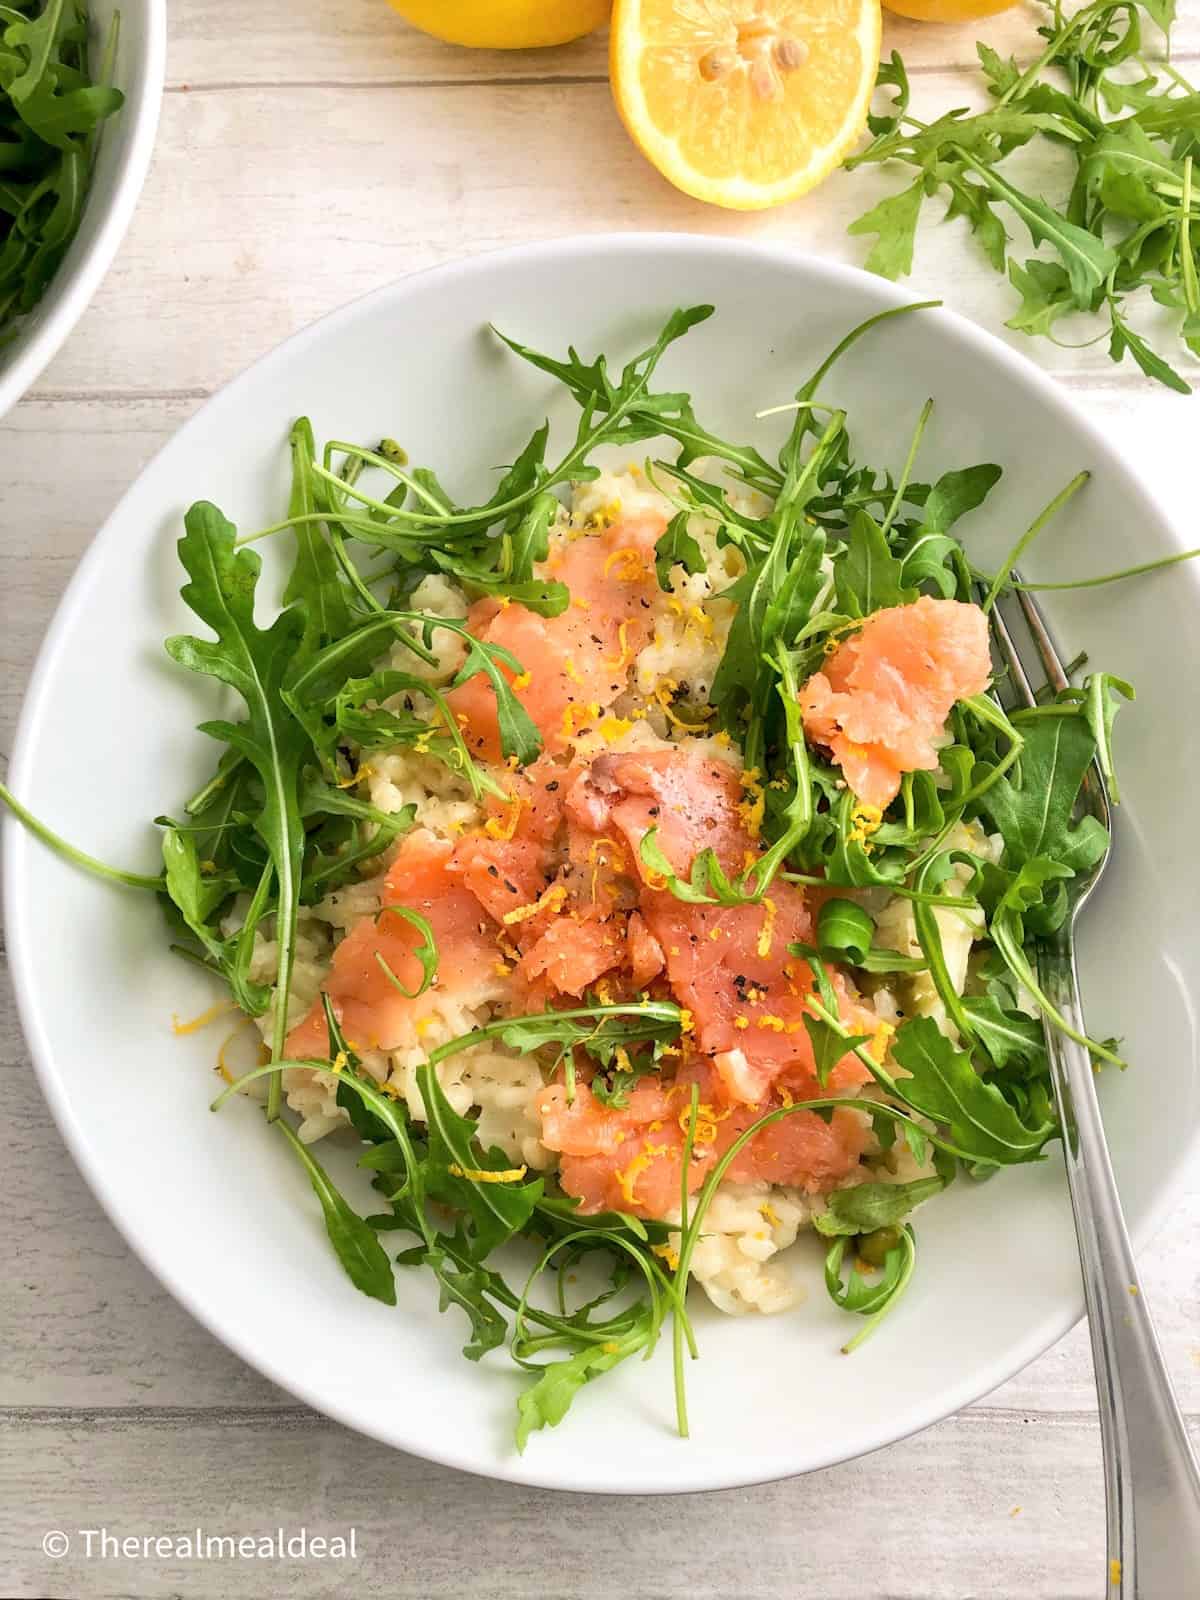 smoked salmon with a lemony risotto served with rocket leaves